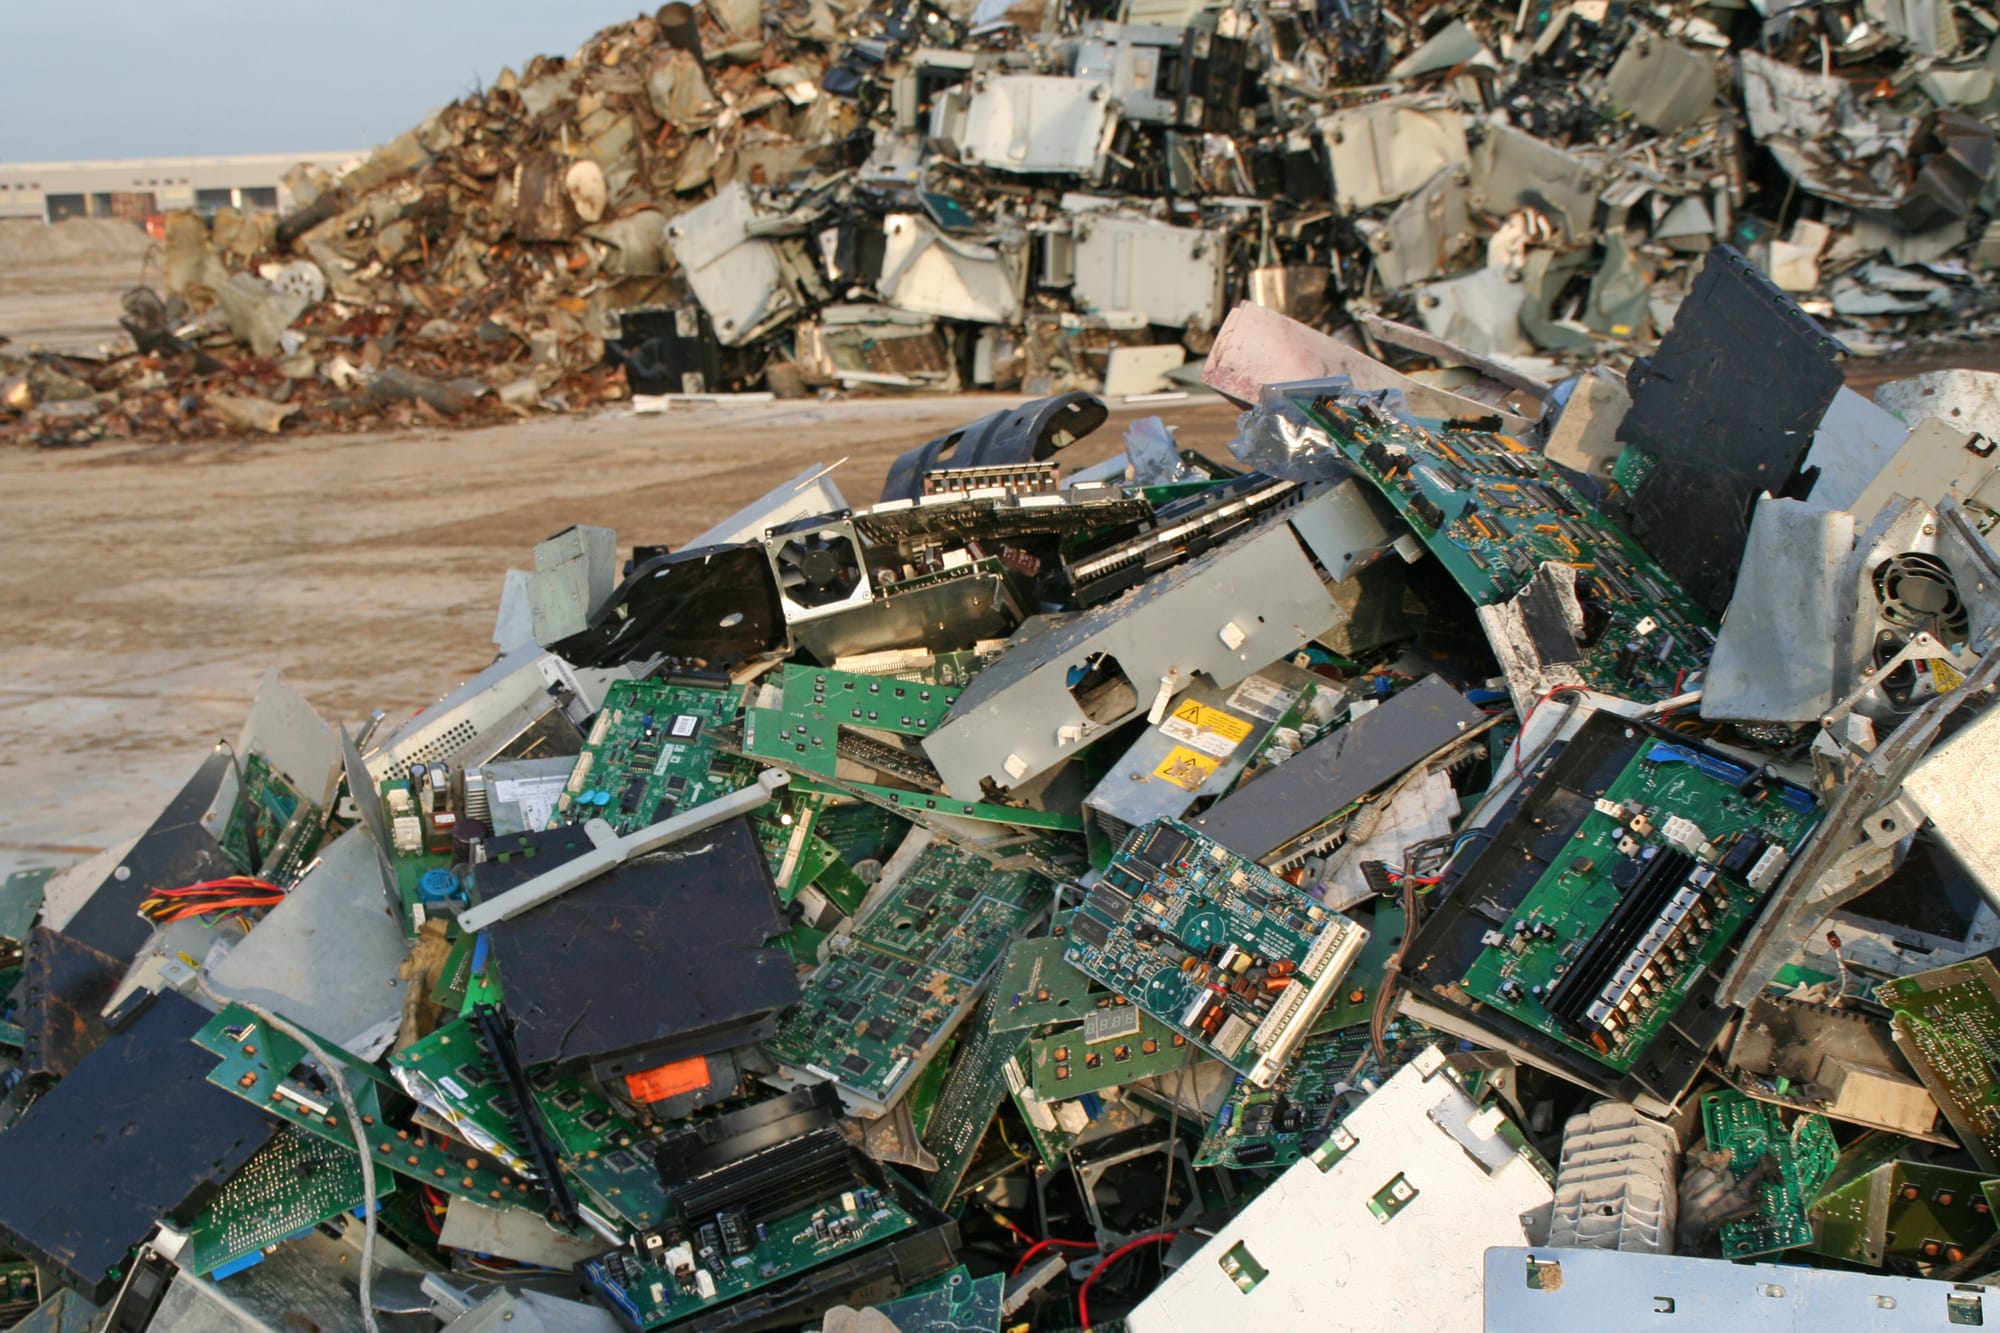 E-waste and the UN International Day of Zero Waste